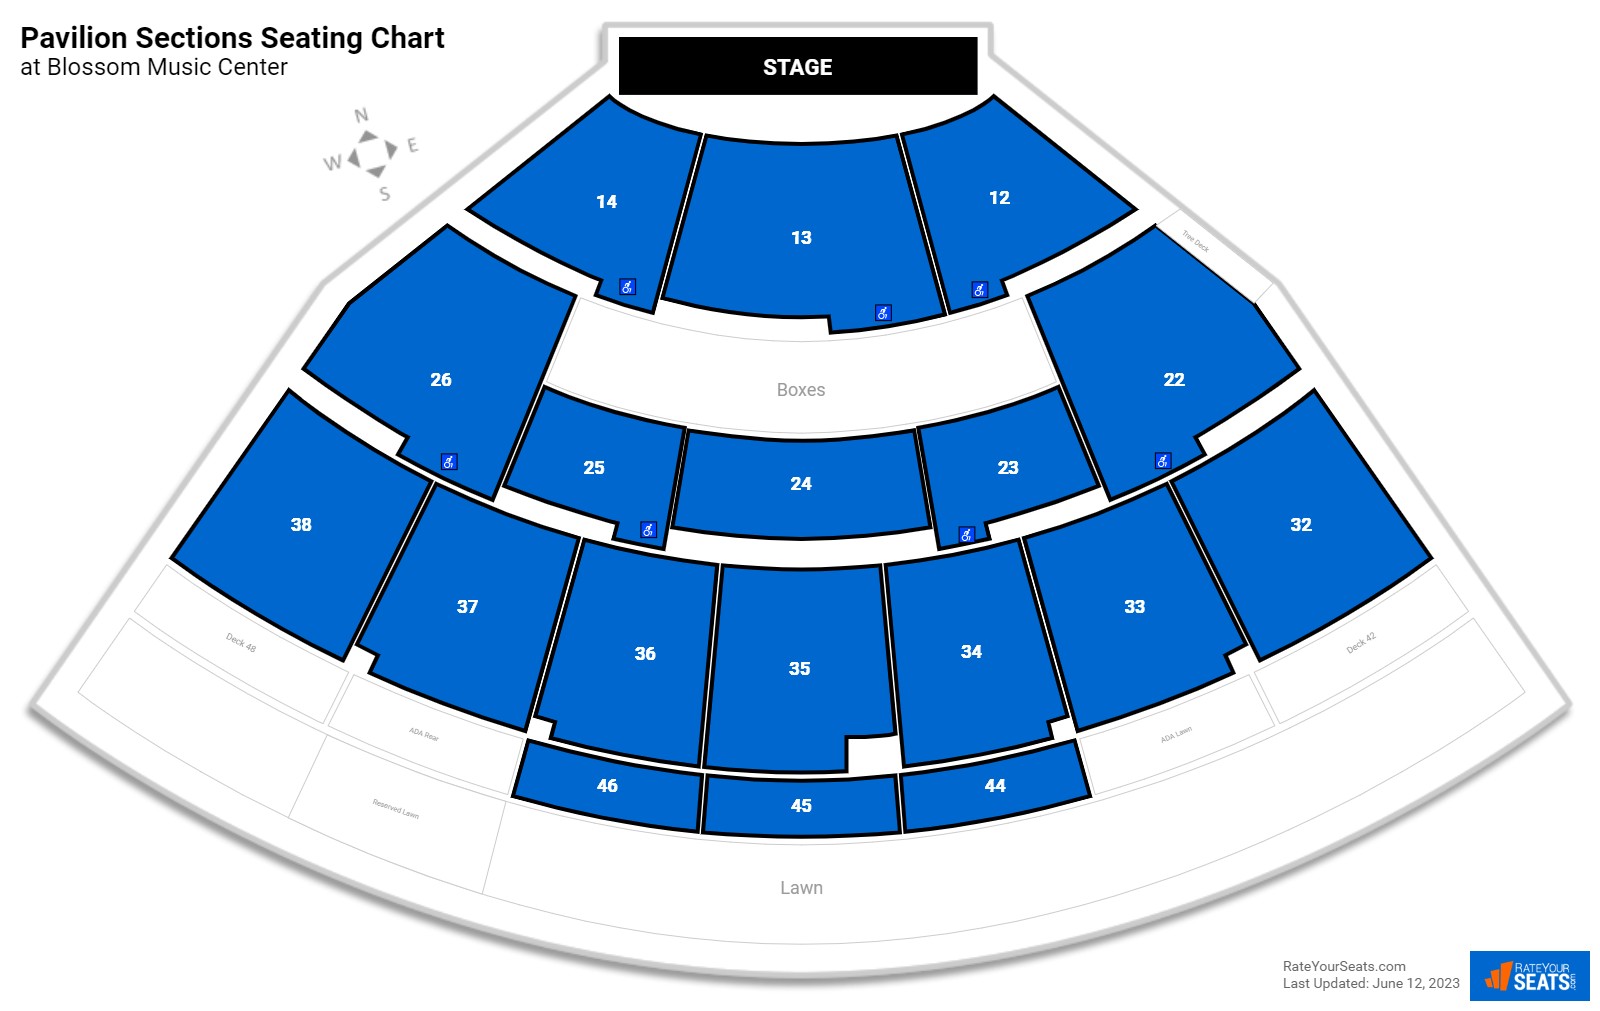 Concert Pavilion Sections Seating Chart at Blossom Music Center